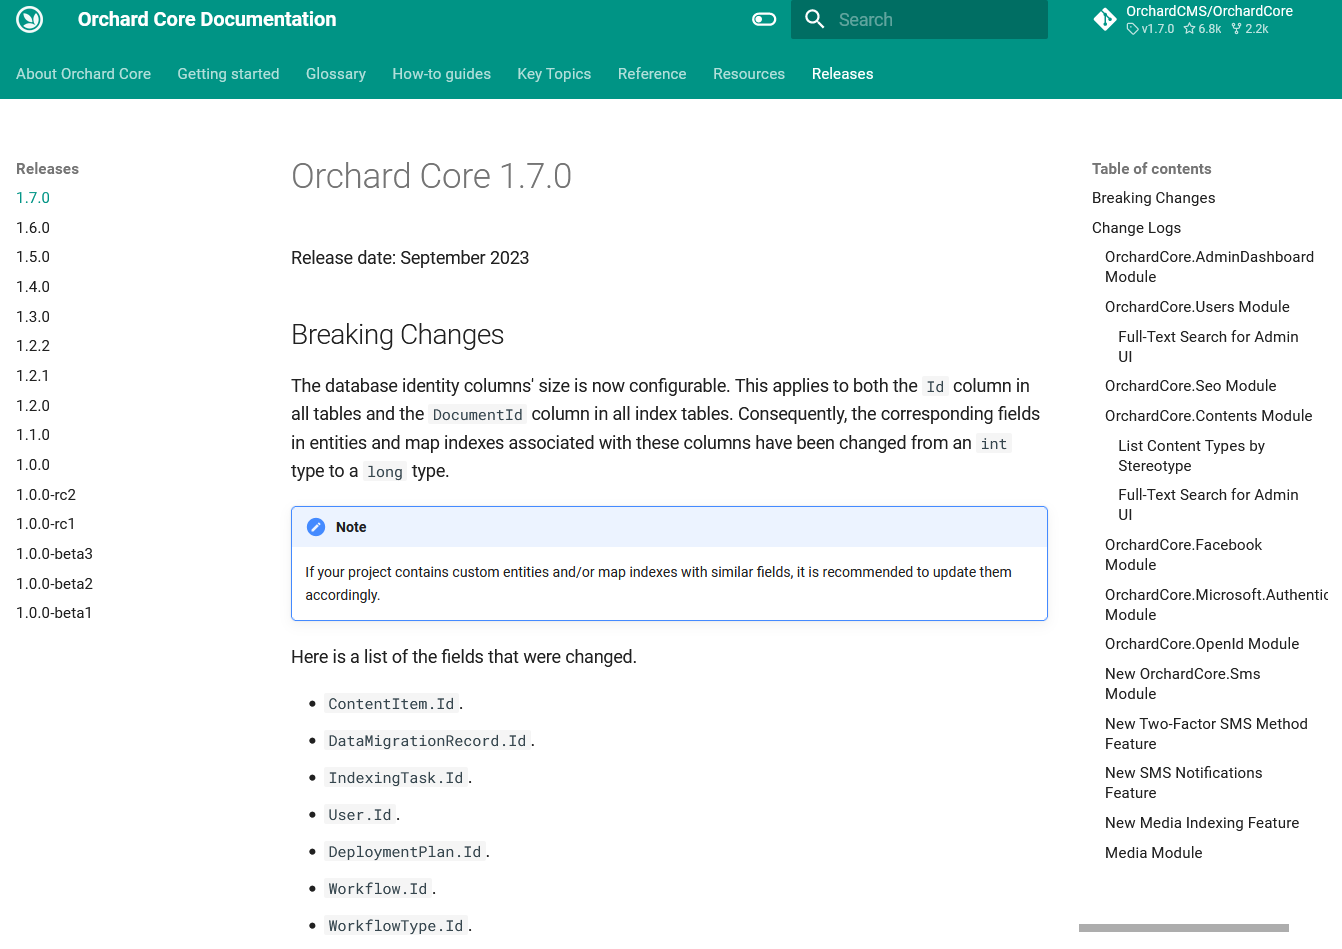 Orchard Core 1.7 release details